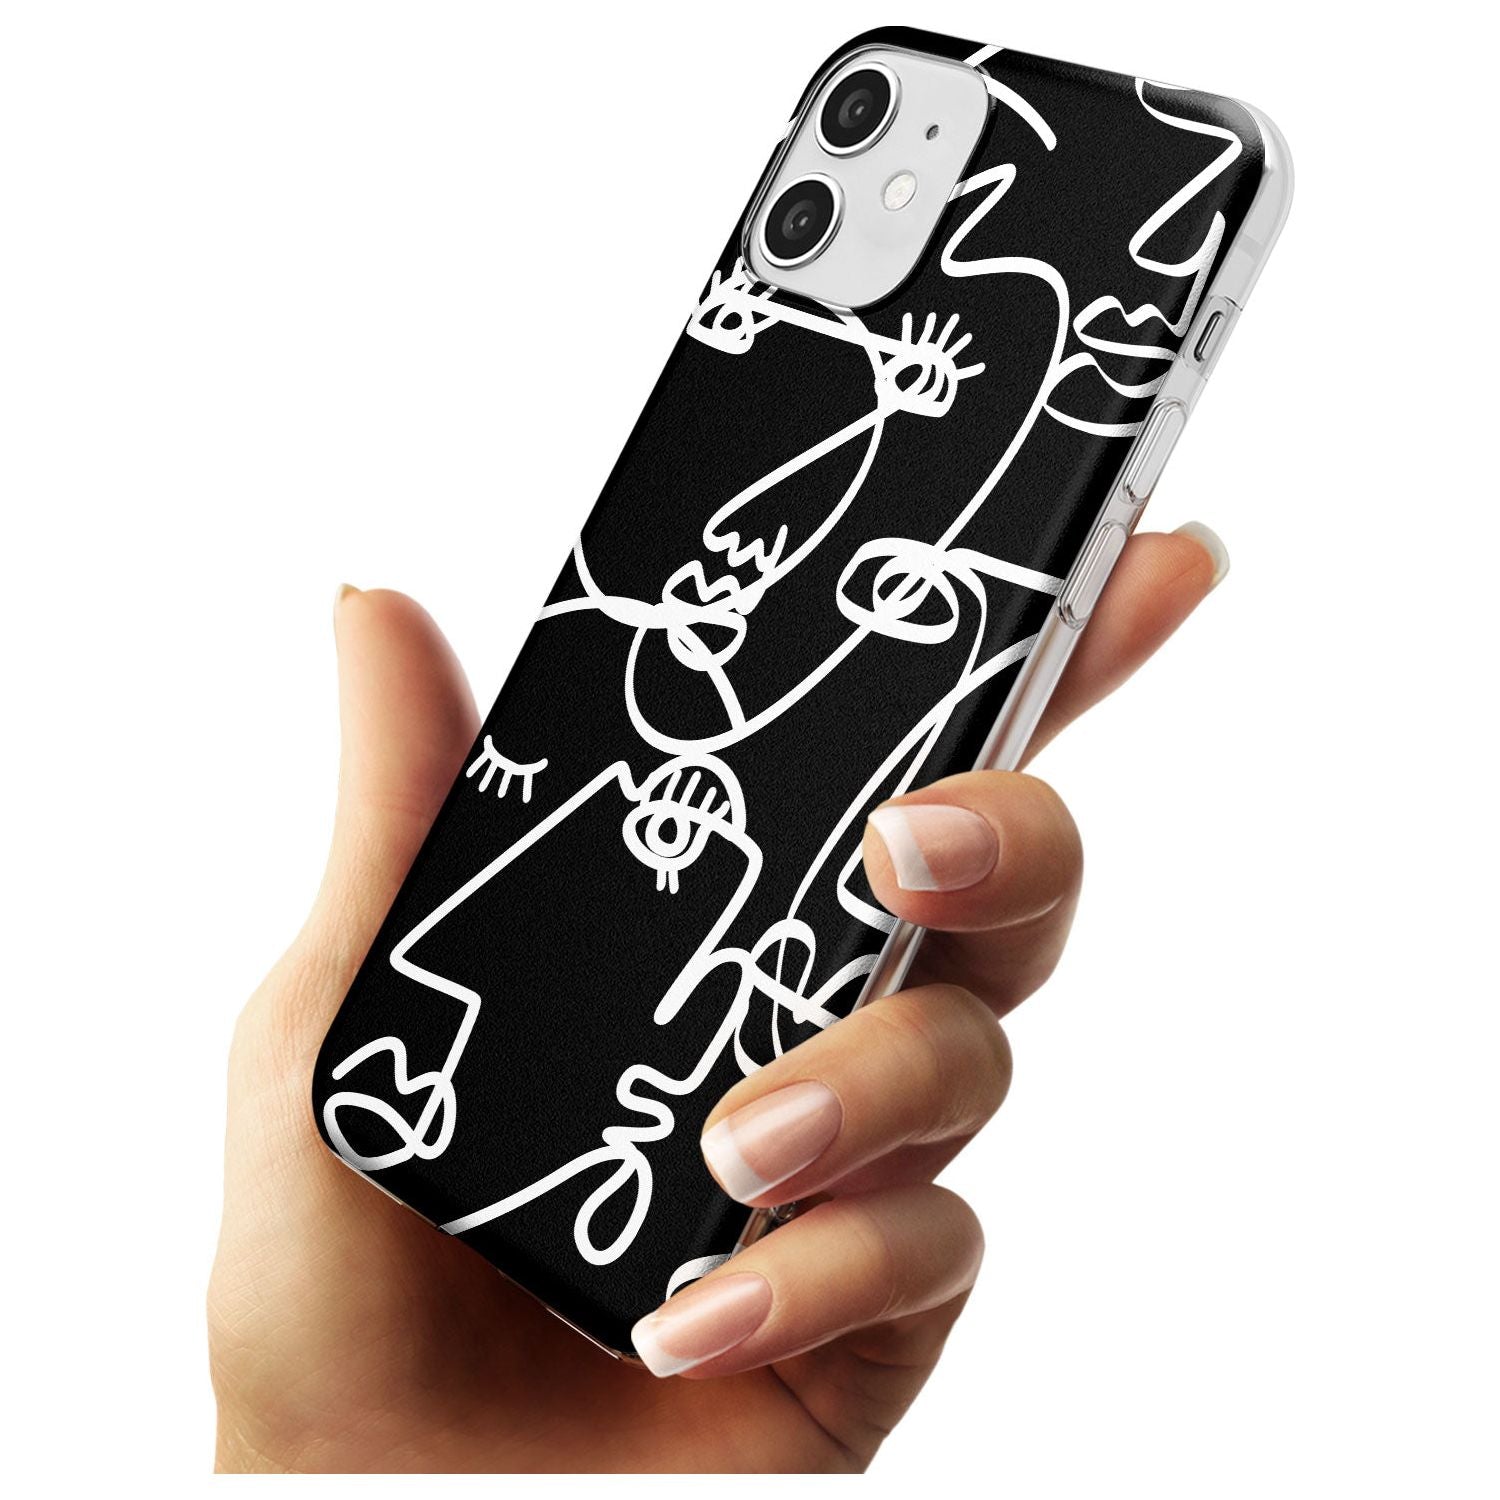 Continuous Line Faces: White on Black Black Impact Phone Case for iPhone 11